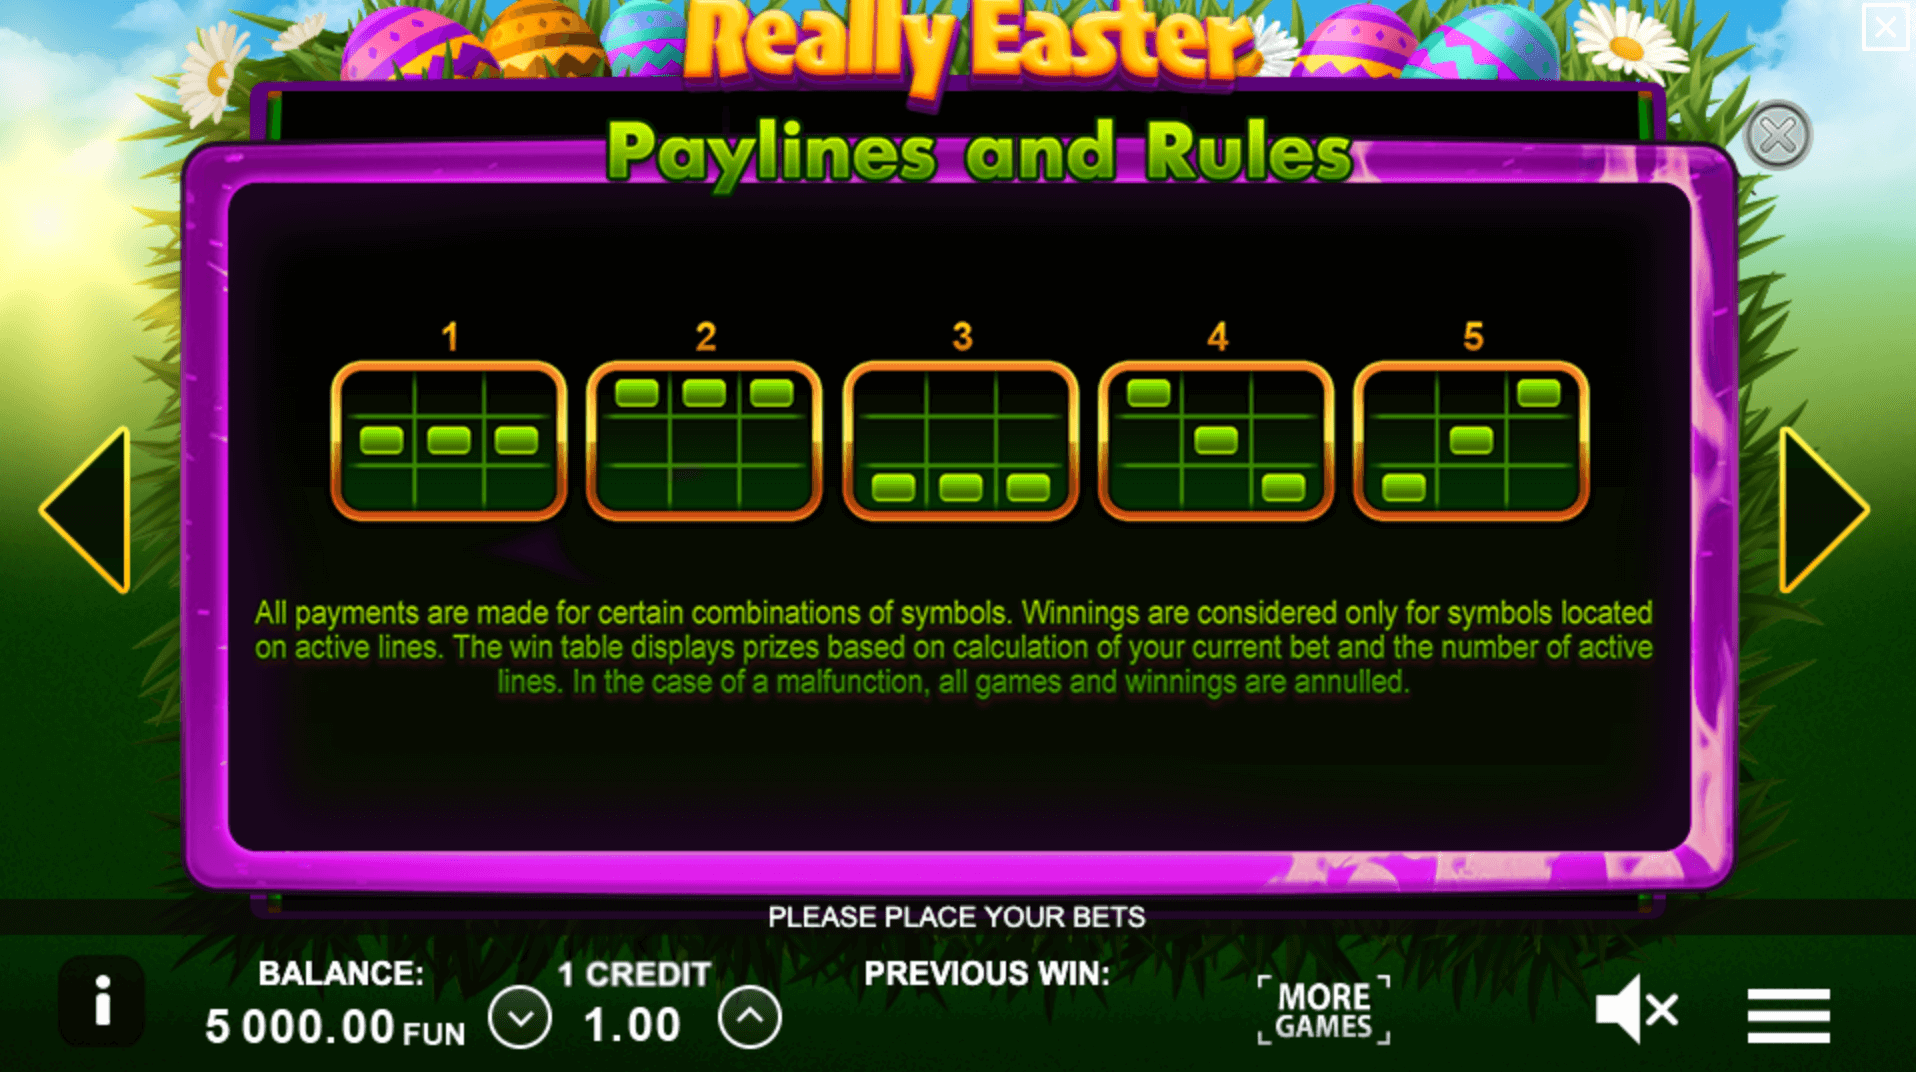 Really Easter Spel proces